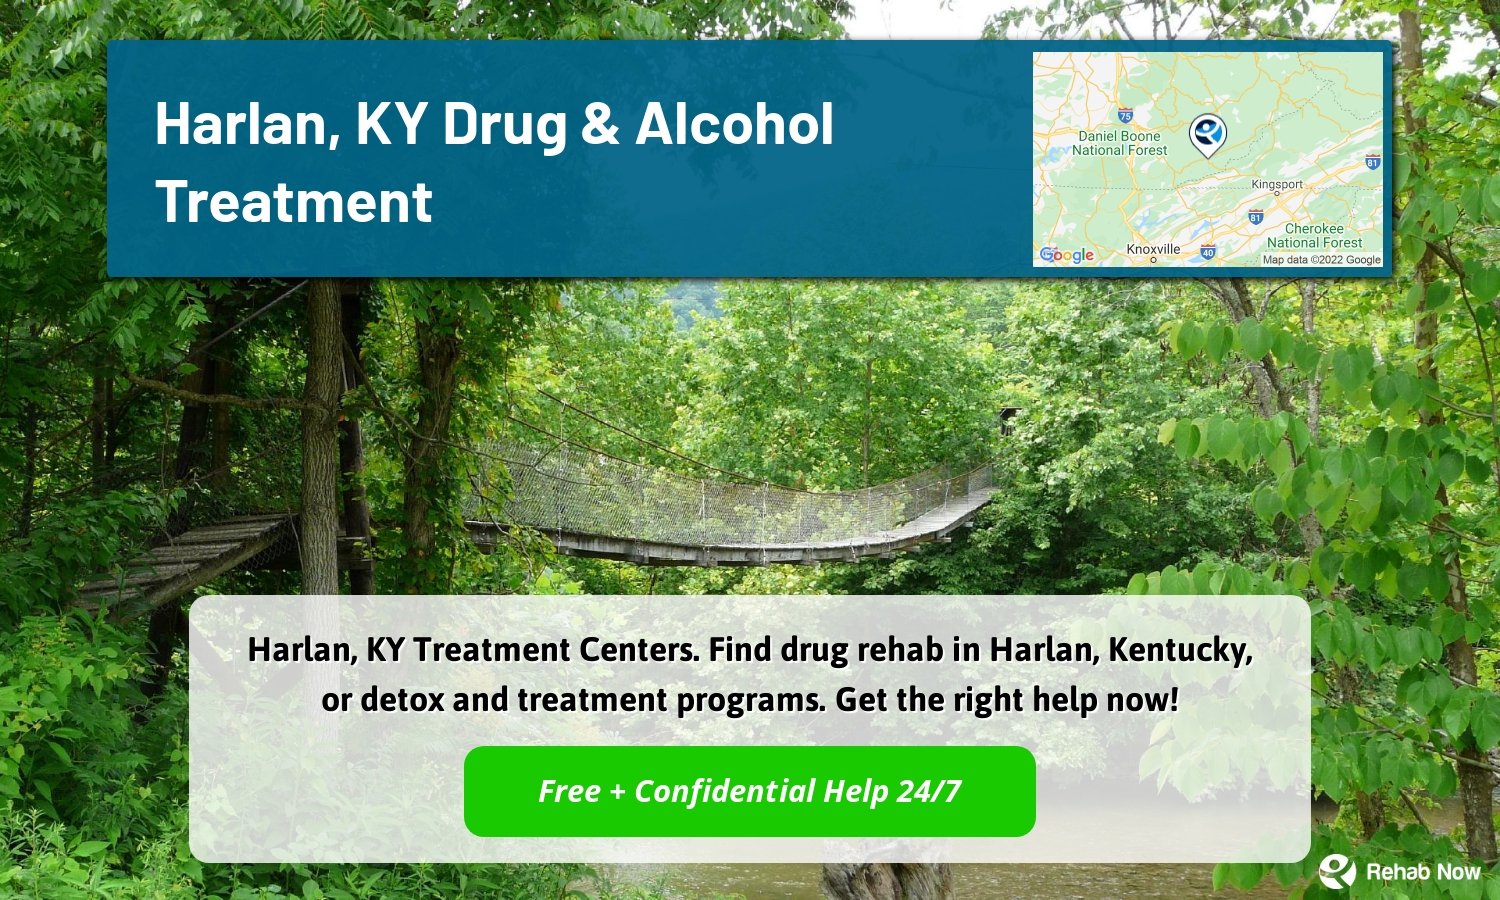 Harlan, KY Treatment Centers. Find drug rehab in Harlan, Kentucky, or detox and treatment programs. Get the right help now!